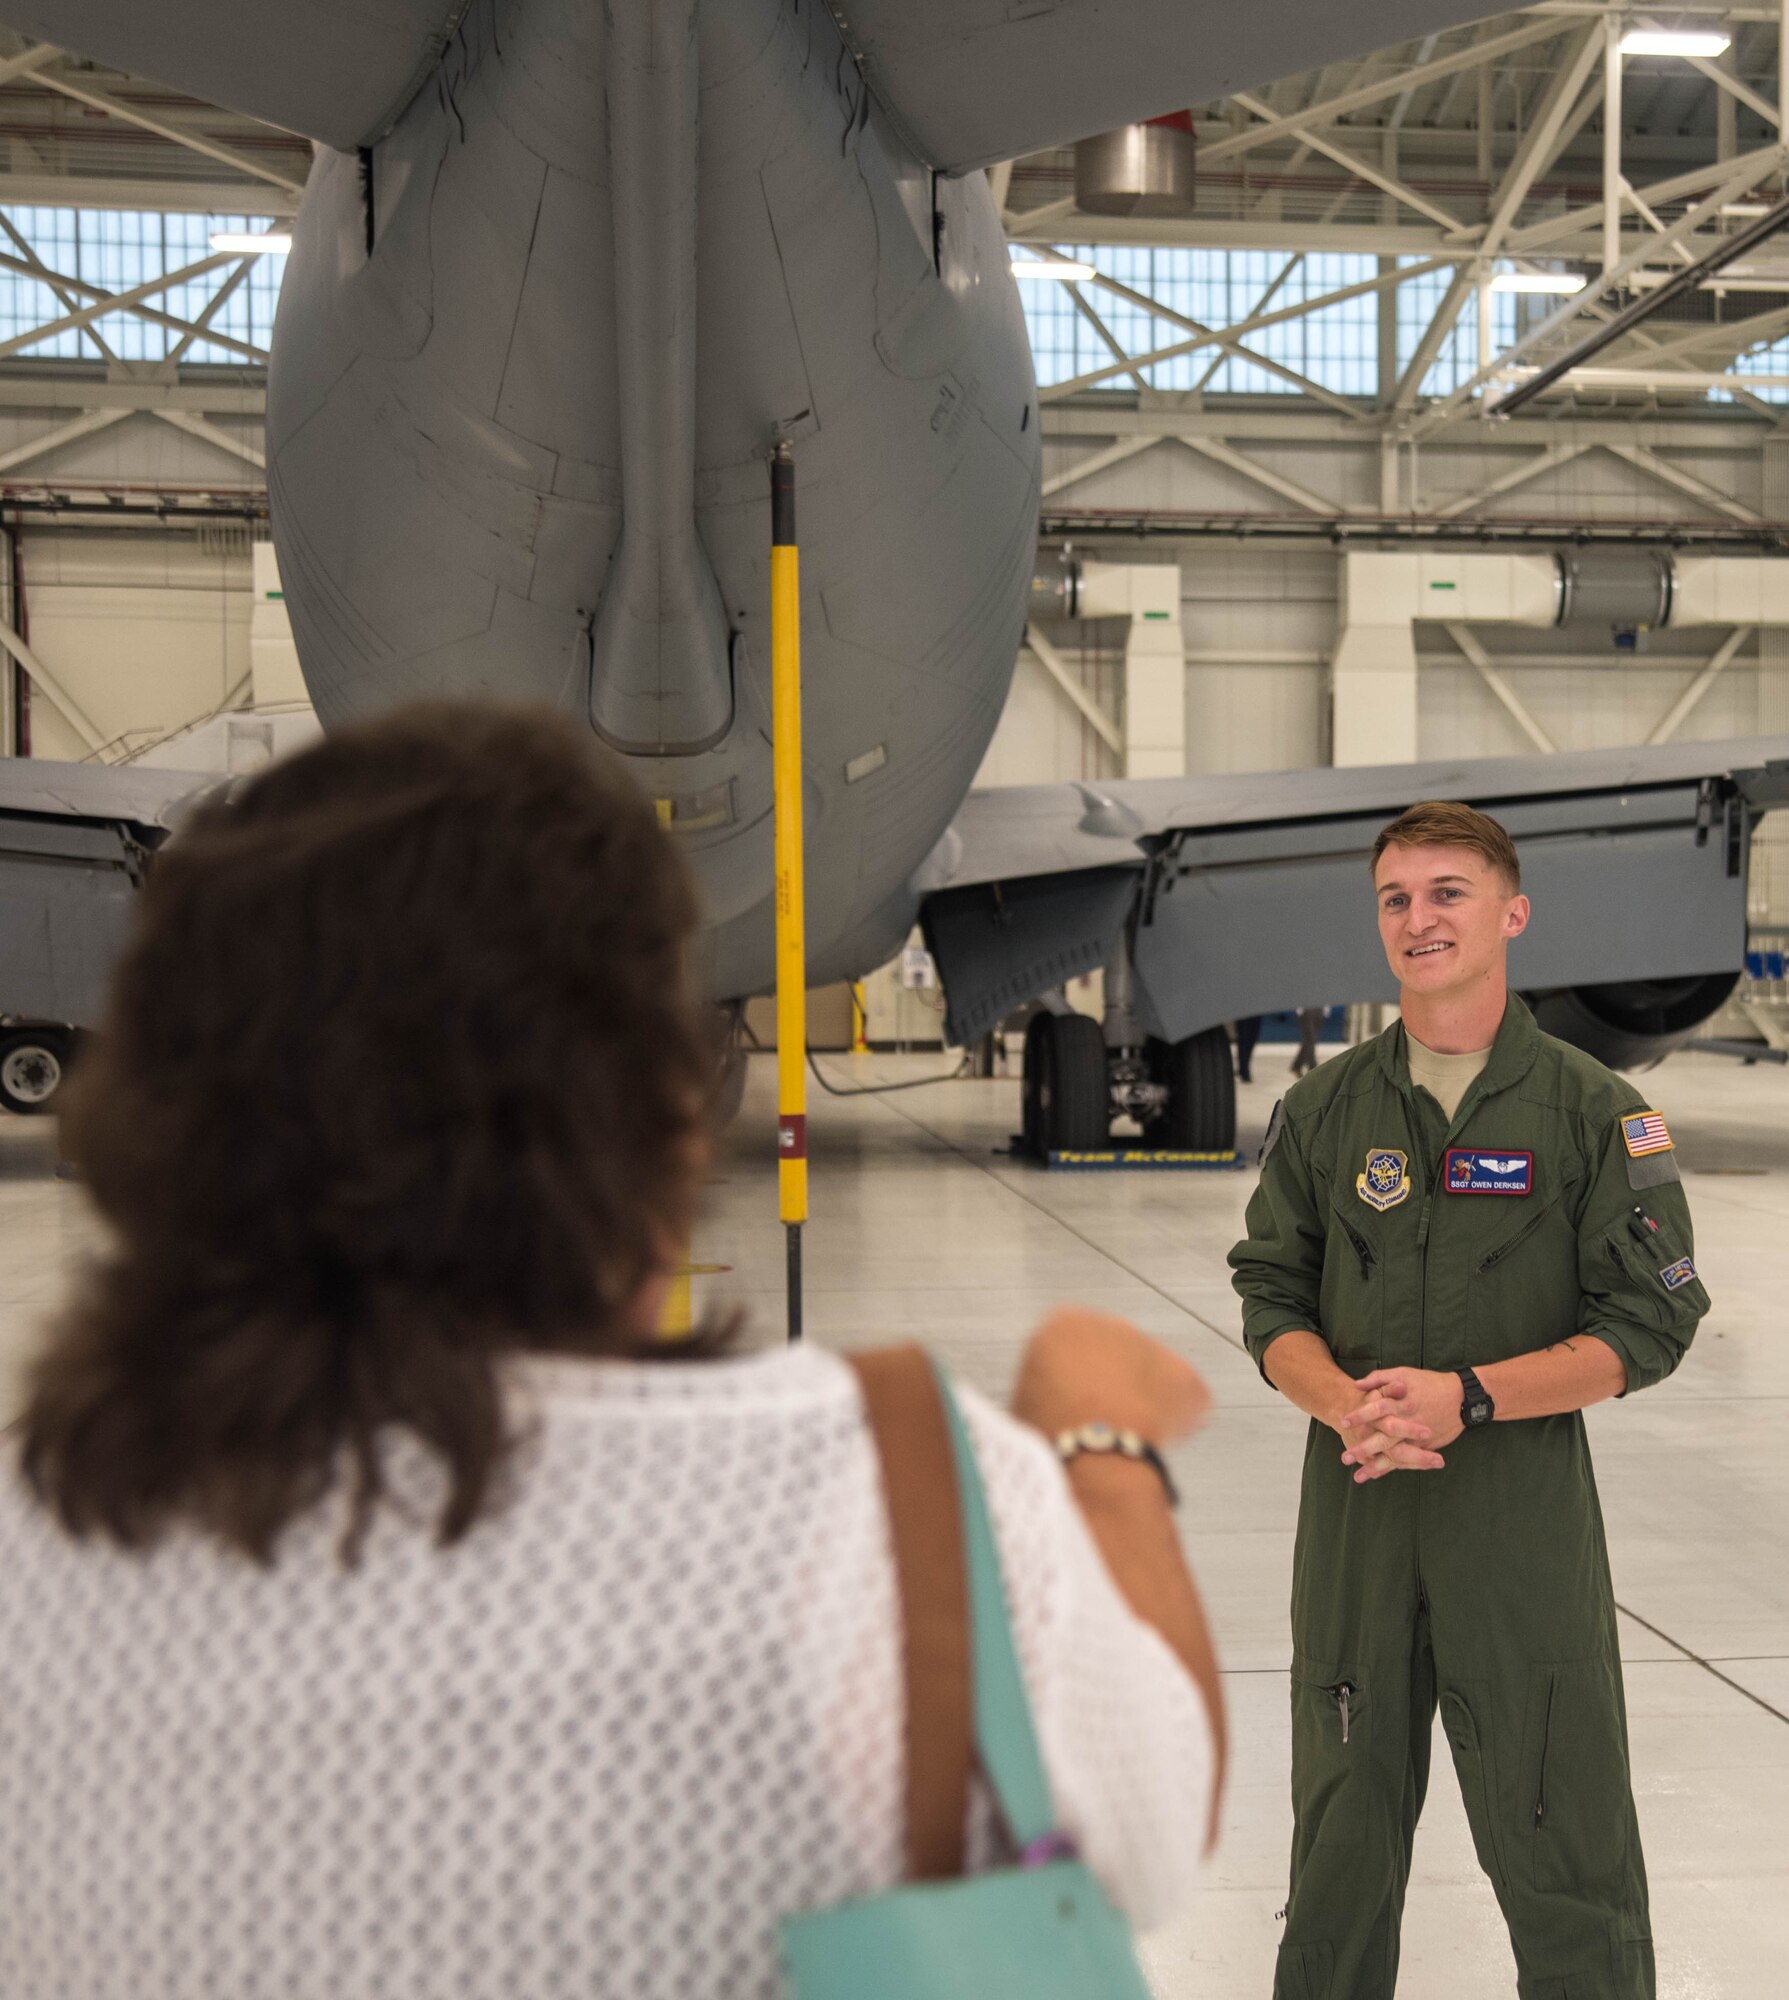 Staff Sgt. Owen Derksen, 349th Air Refueling Squadron boom operator, speaks to leaders and historic preservation staff from five Native American tribes Aug. 7, 2018, at McConnell Air Force Base, Kansas. The tribal representatives visited McConnell to communicate their interests to base leadership, they then attended a mission brief, base tour and a community visit to the local Mid-America All-Indian Center. (U.S. Air Force photo by Staff Sgt. Chris Thornbury)